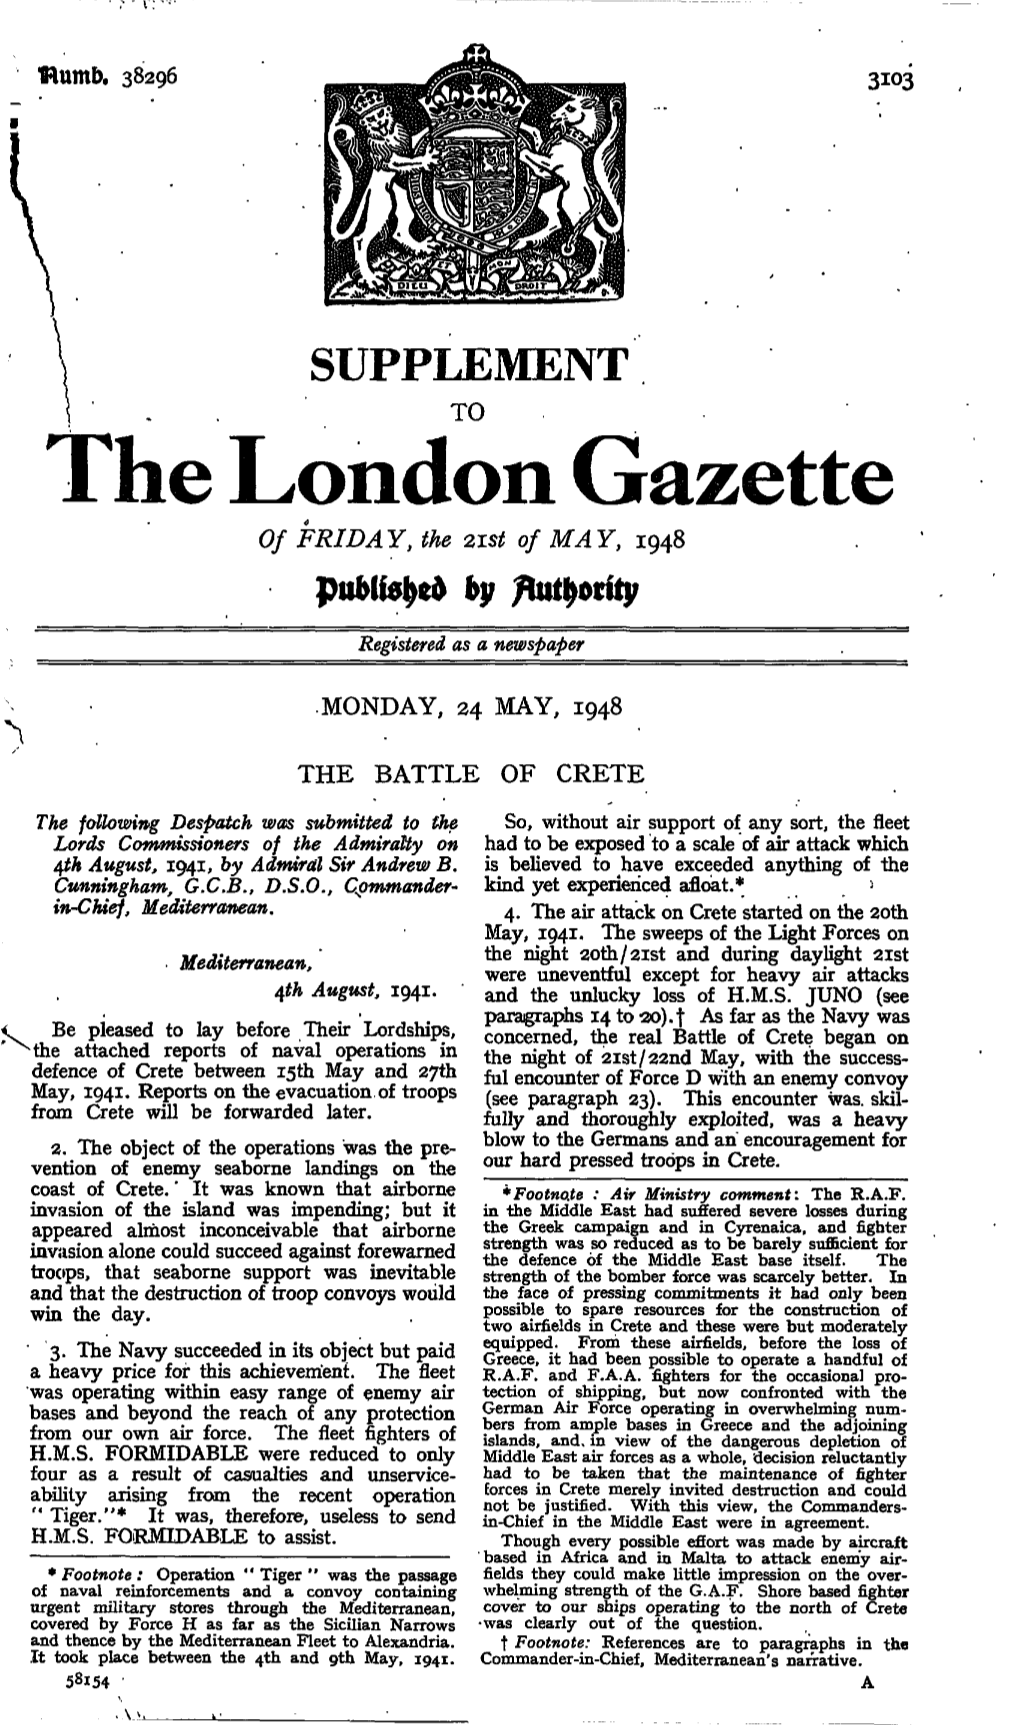 The London Gazette of FRIDAY, the 2Ist of MAY, 1948 By